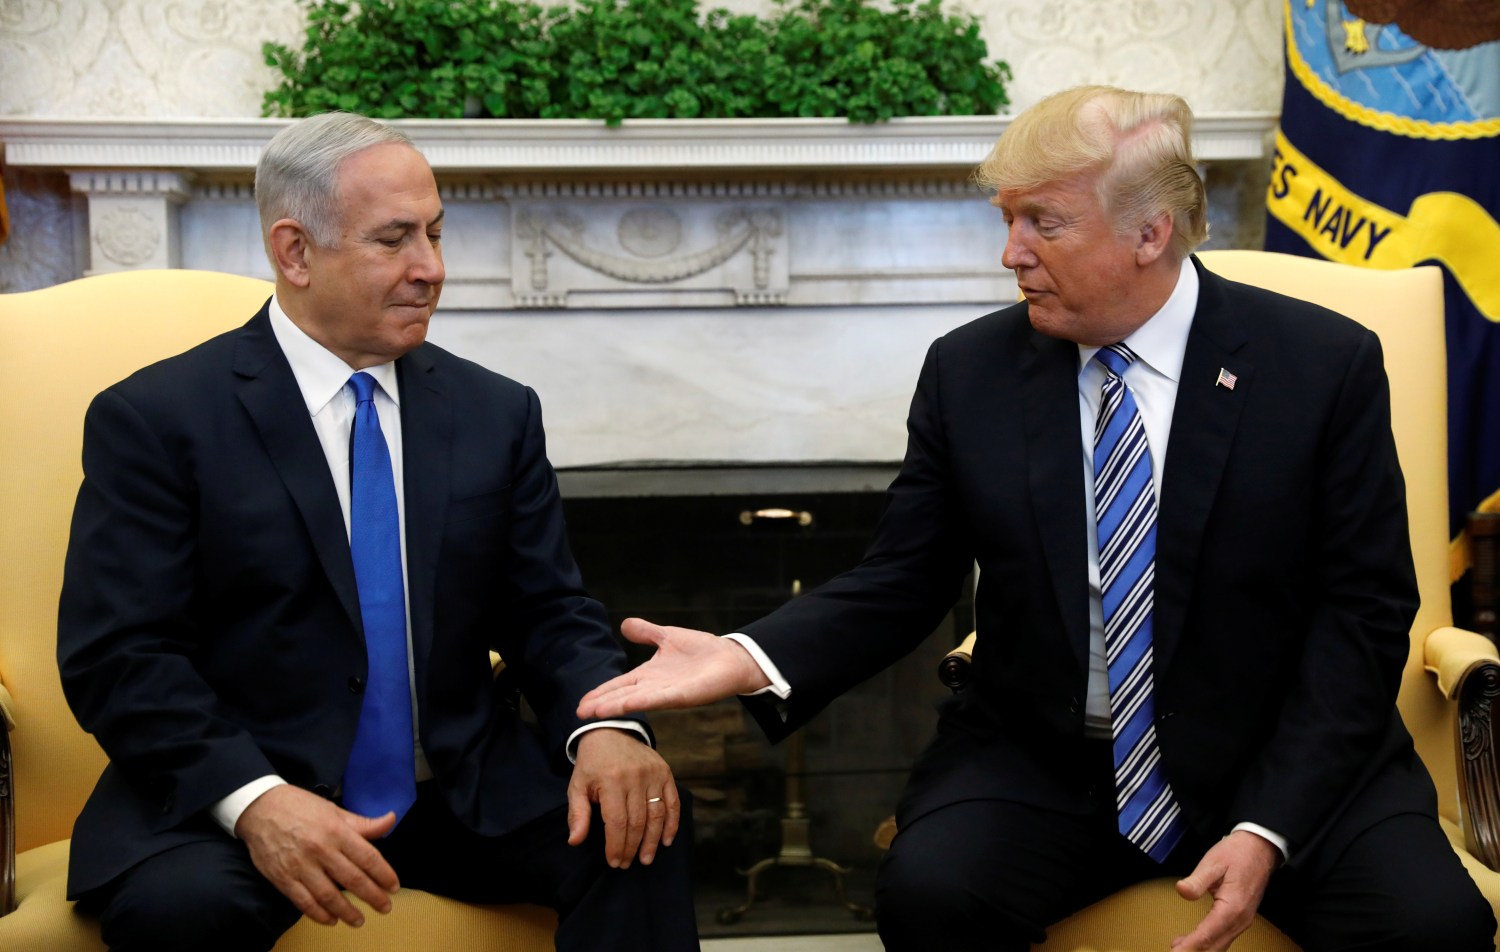 U.S. President Donald Trump meets with Israel Prime Minister Benjamin Netanyahu in the Oval Office of the White House in Washington, U.S., March 5, 2018. REUTERS/Kevin Lamarque - RC1912CE3760